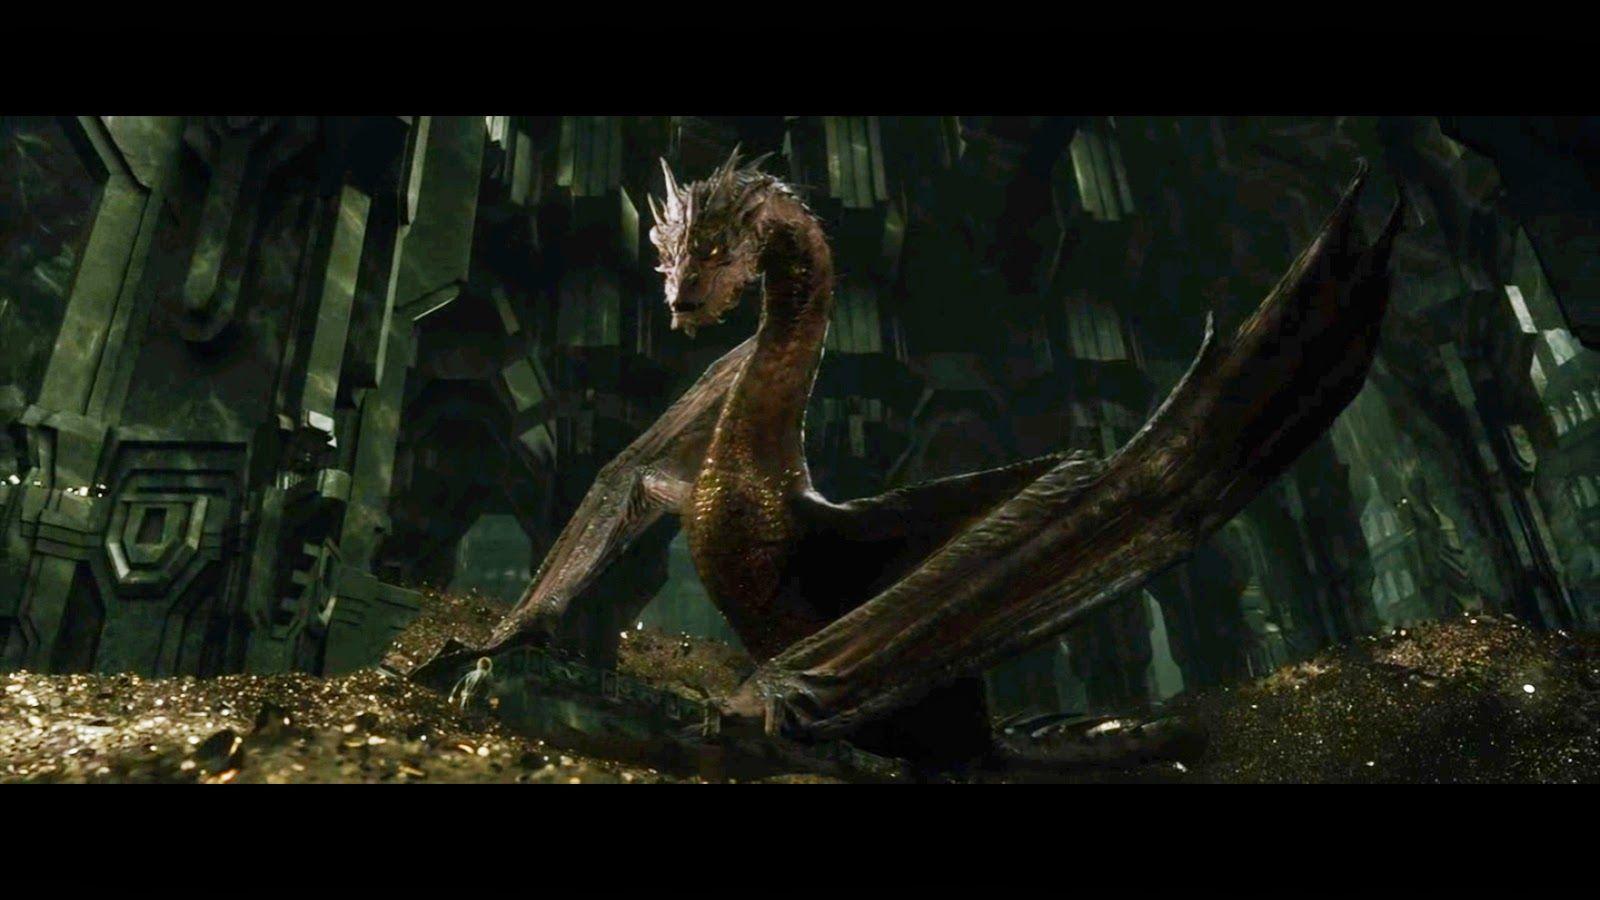 Smaug The Dragon From The Hobbit Movie Wallpaper